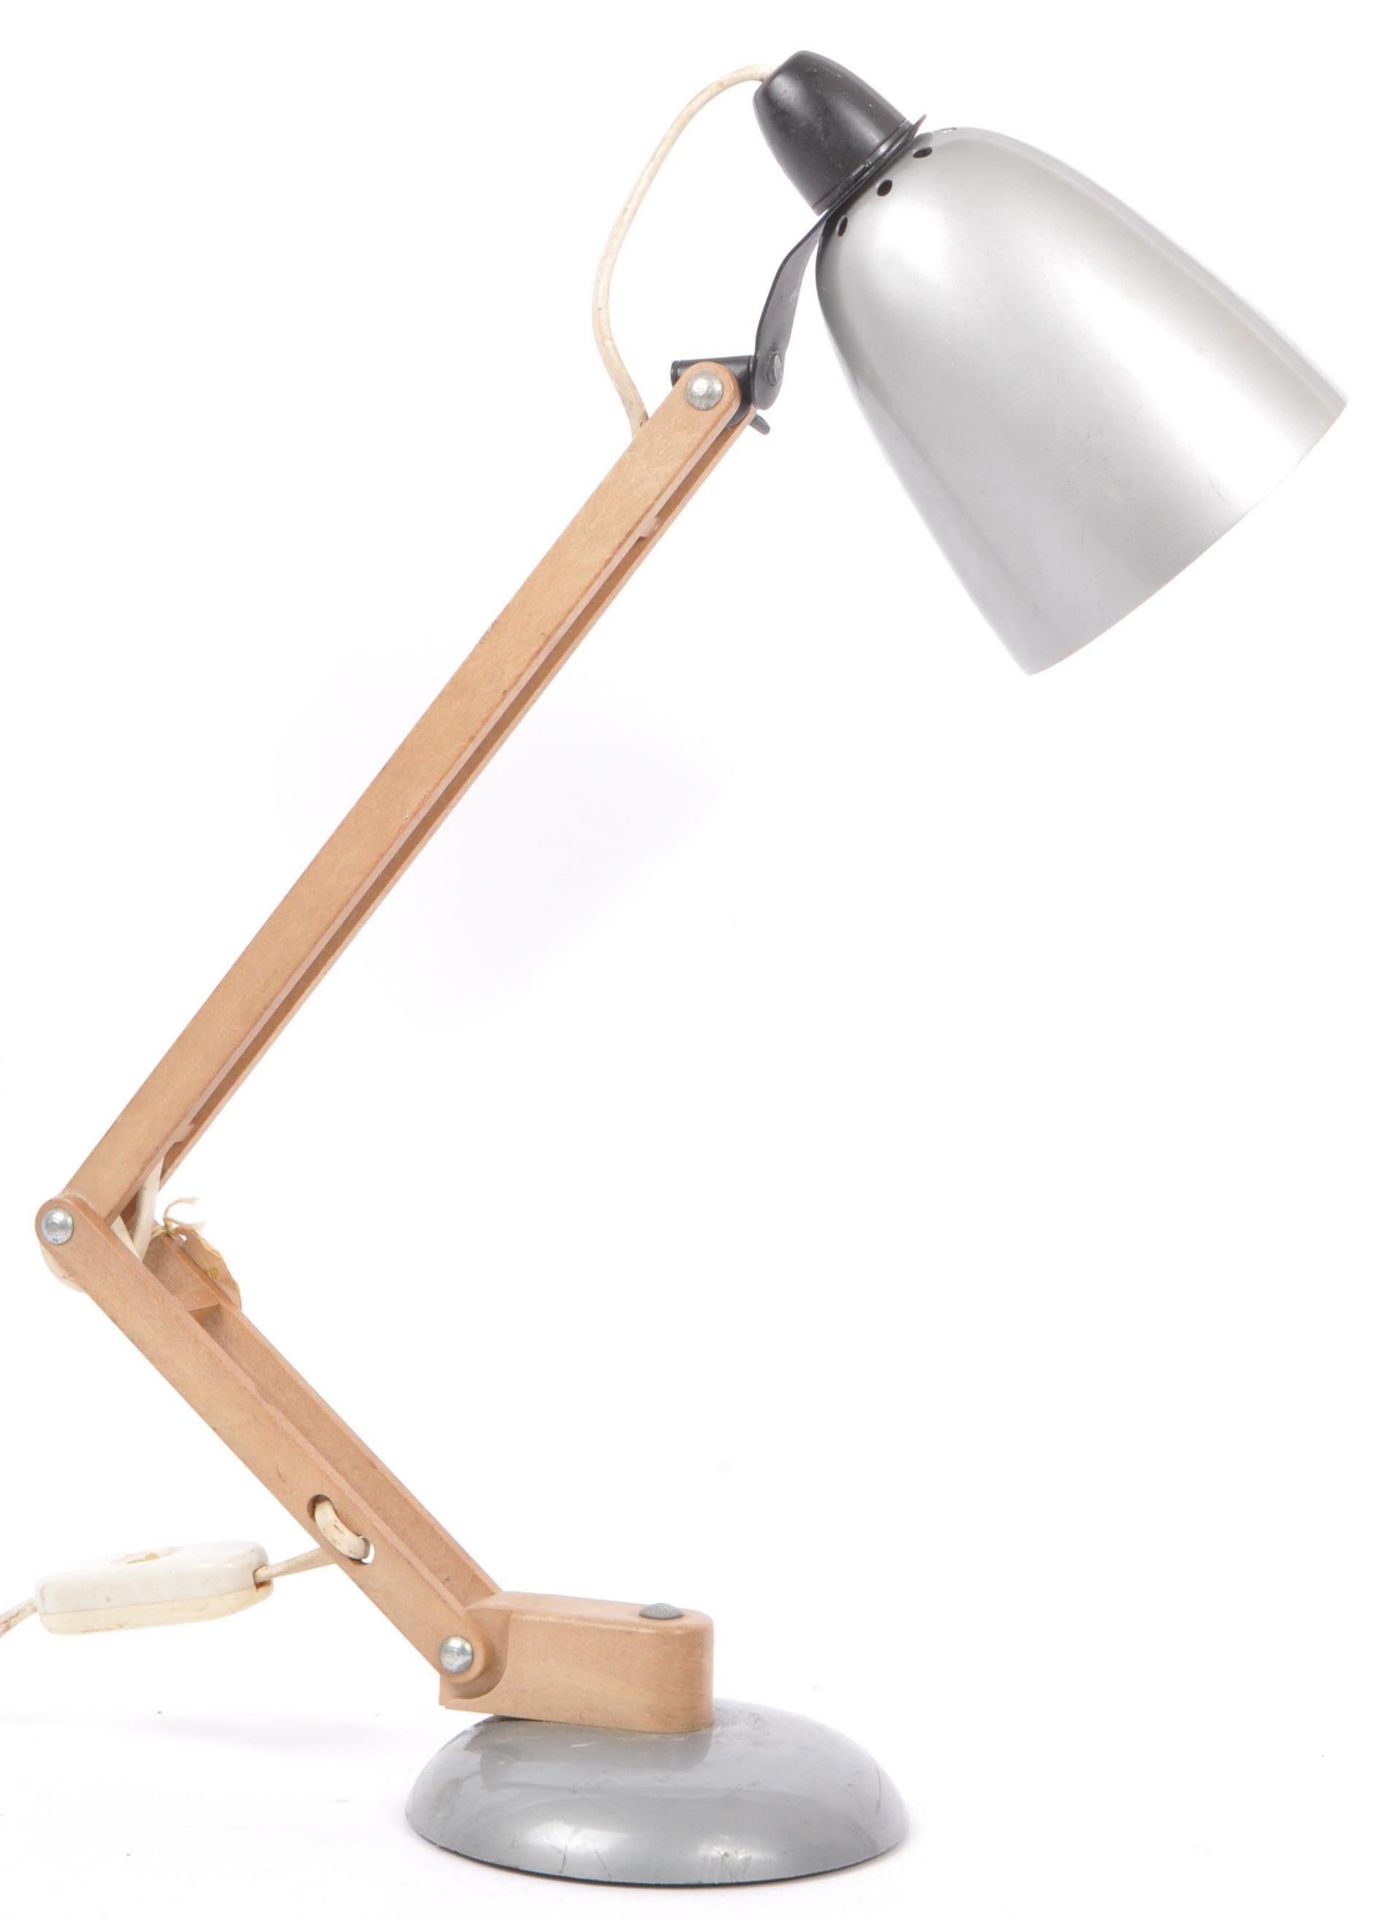 MID CENTURY TERENCE CONRAN HABITAT ANGLEPOISE LAMP - Image 3 of 5